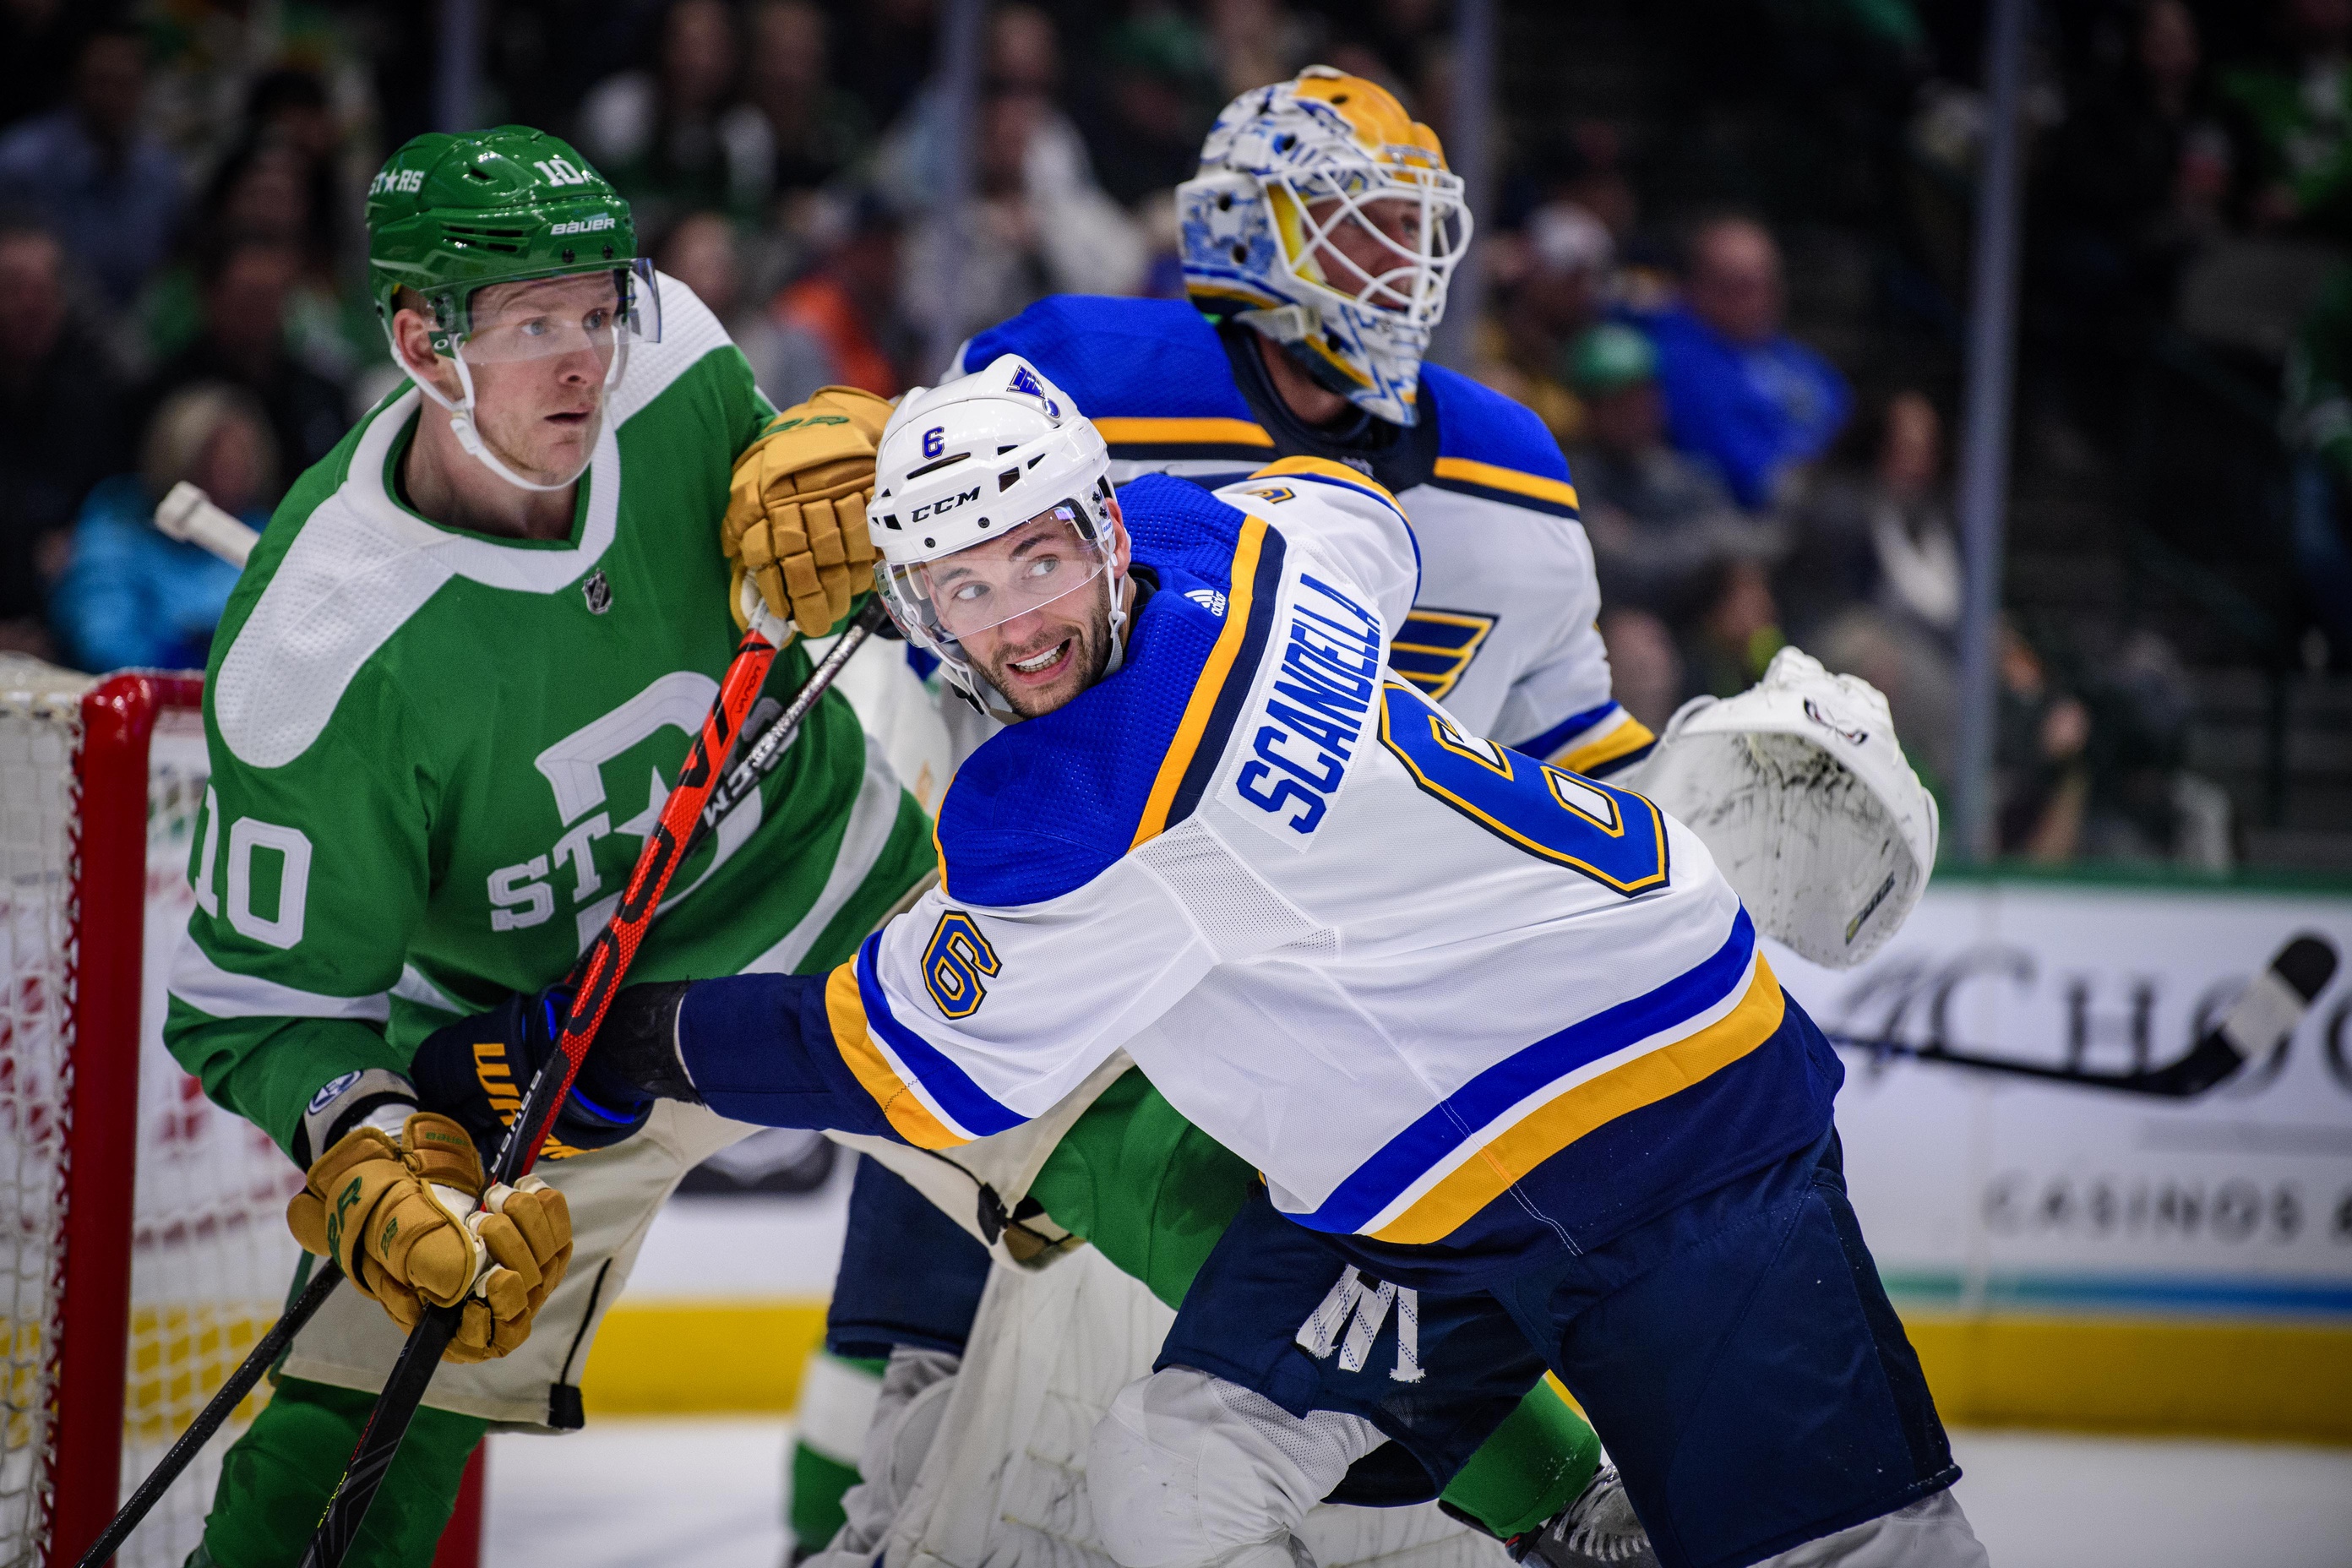 Fox Sports Midwest to air 2019 Blues-Stars playoff series